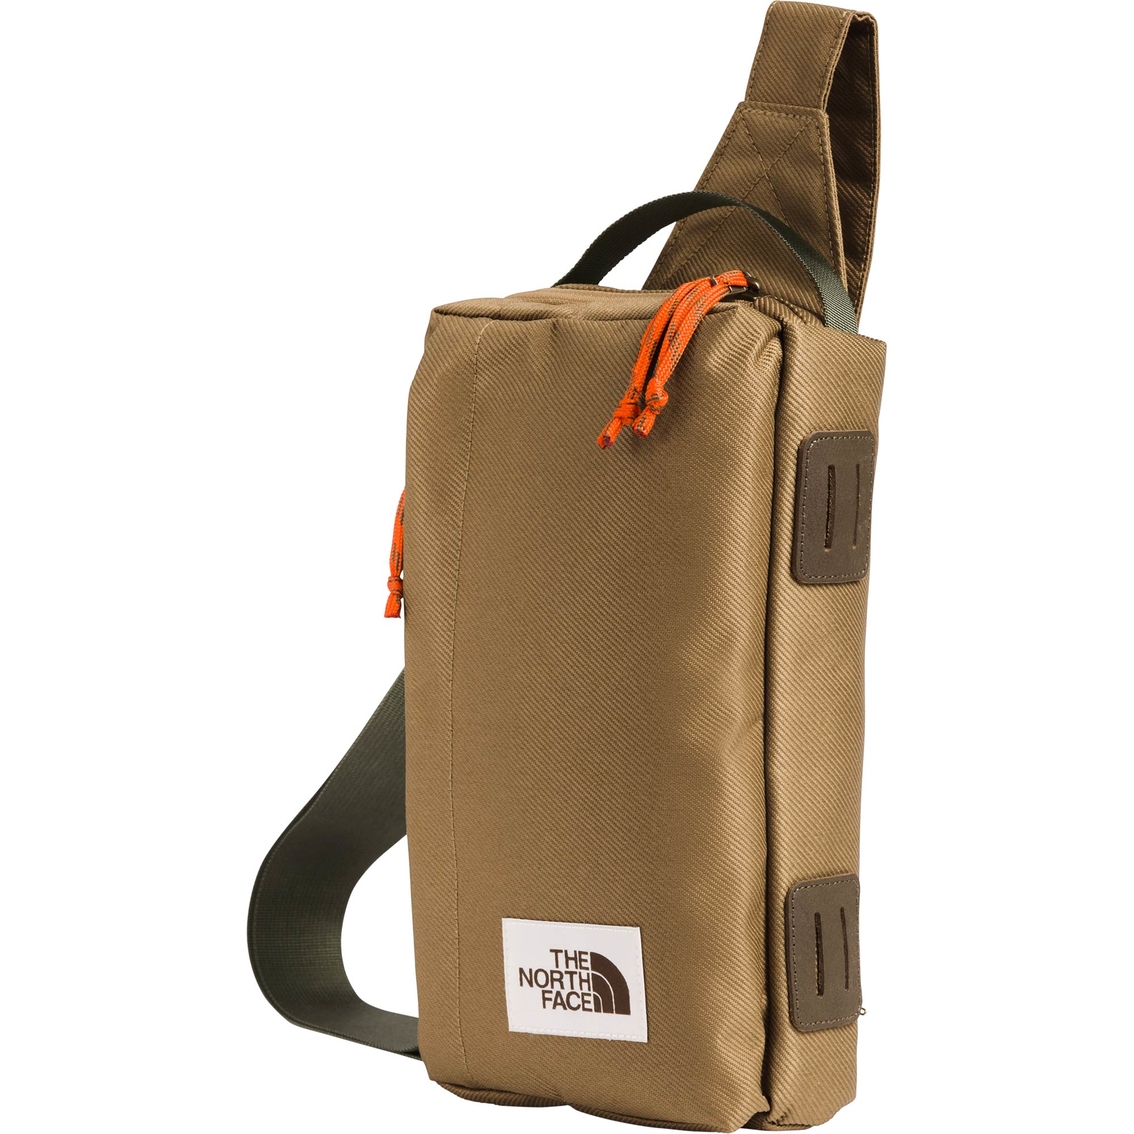 The North Face Field Bag | Accessories | Clothing & Accessories | Shop ...